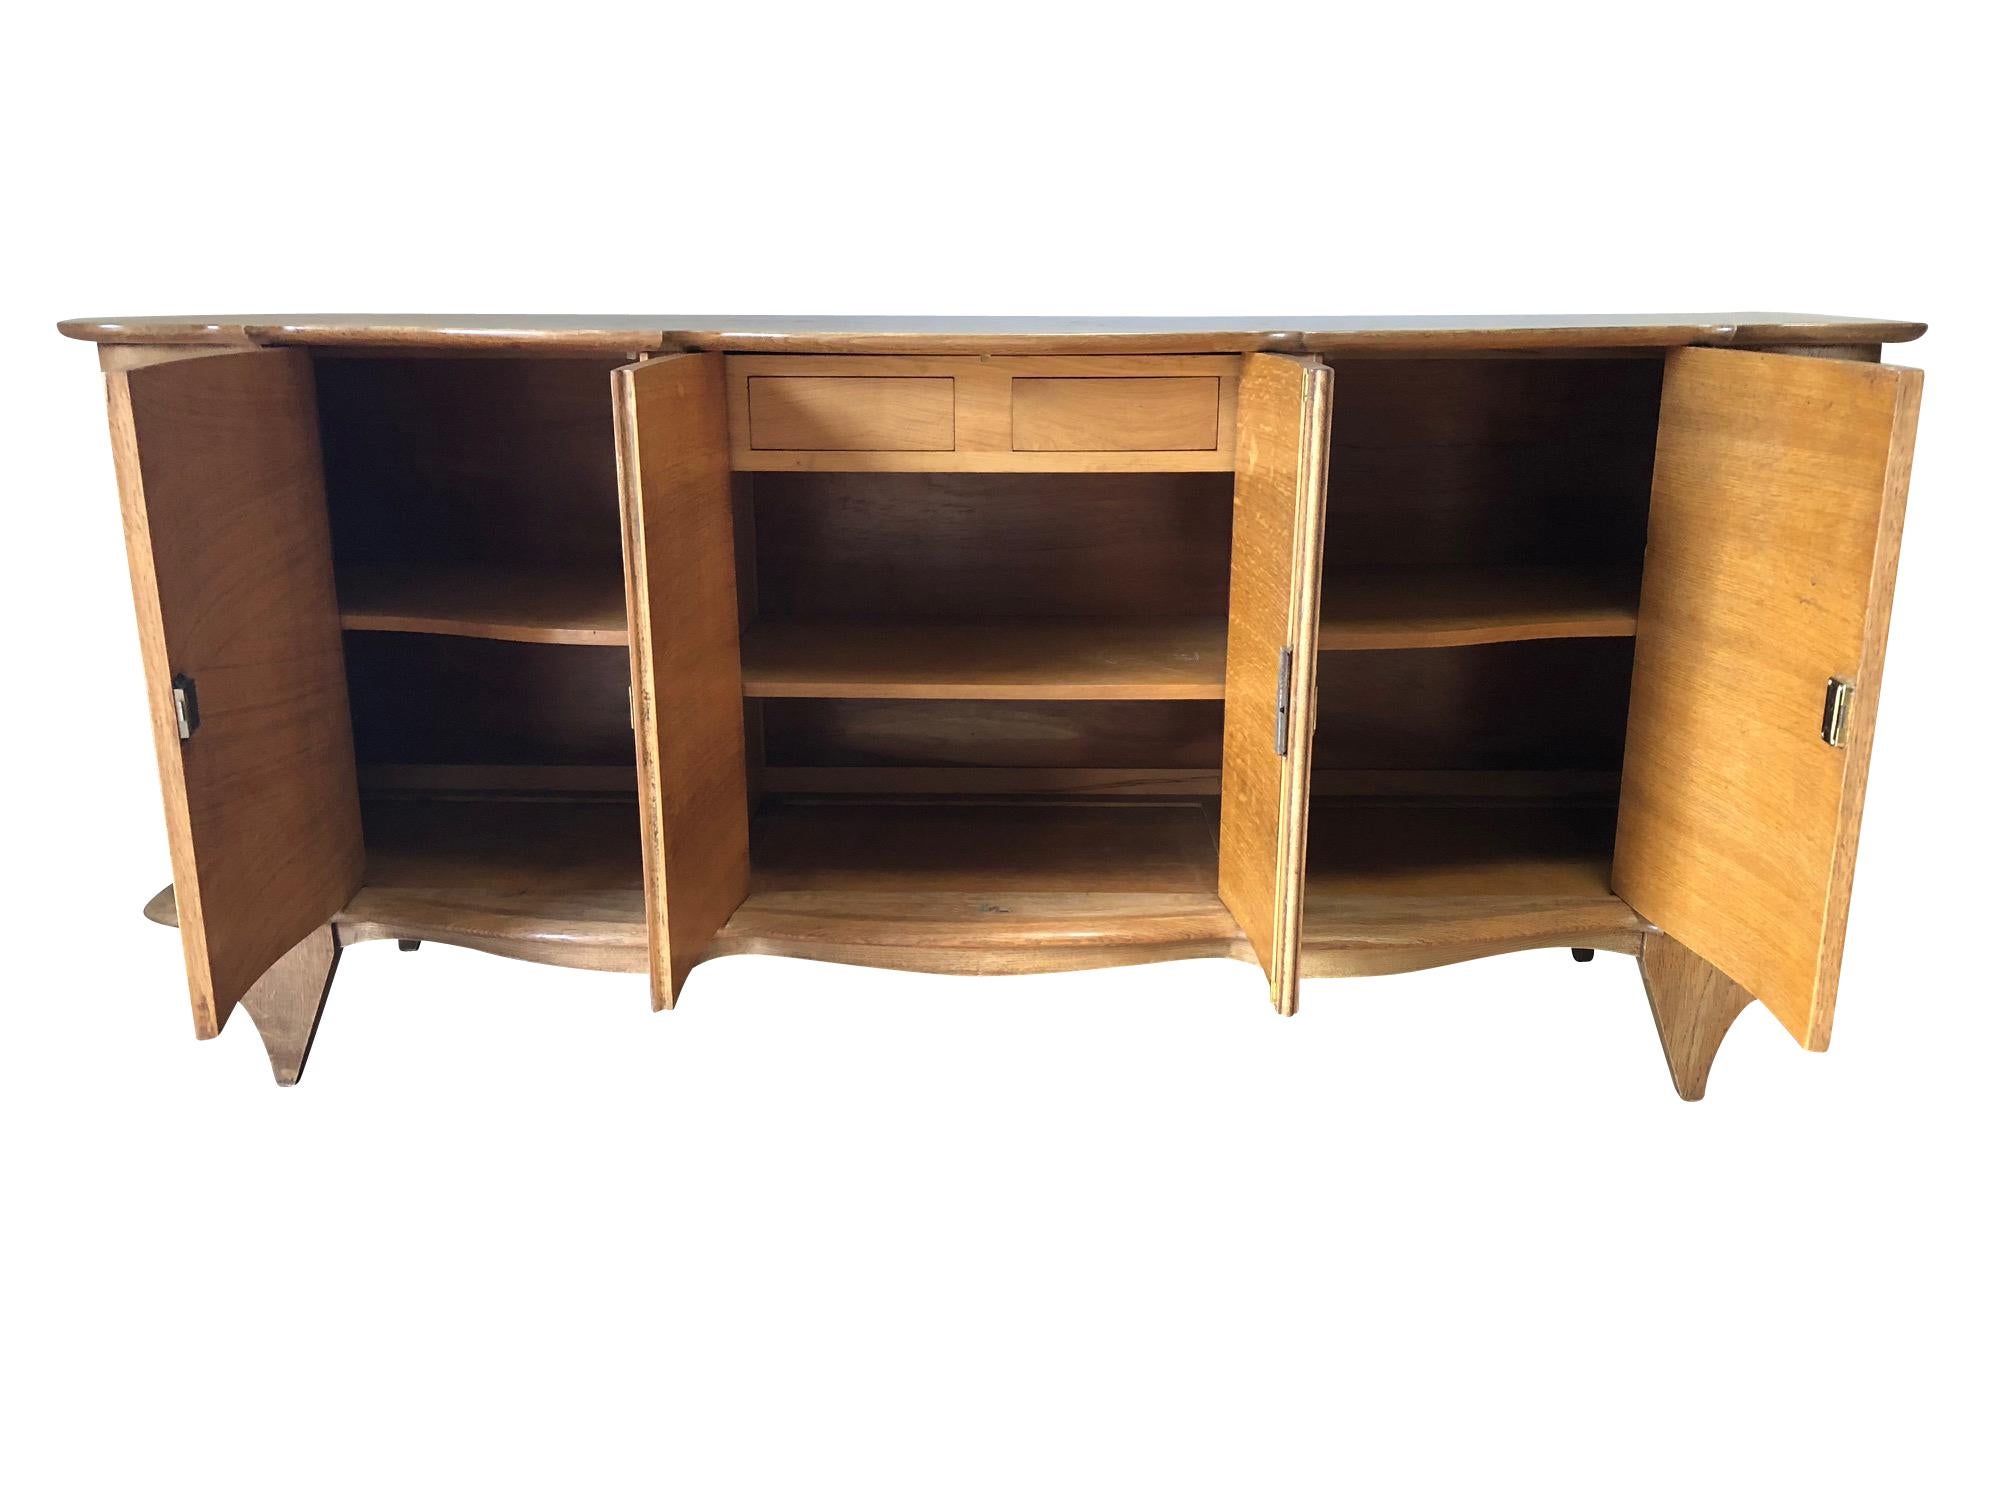 French Signed Jules Leleu Curved Facade Parquetry Pattern Credenza, France, 1940s